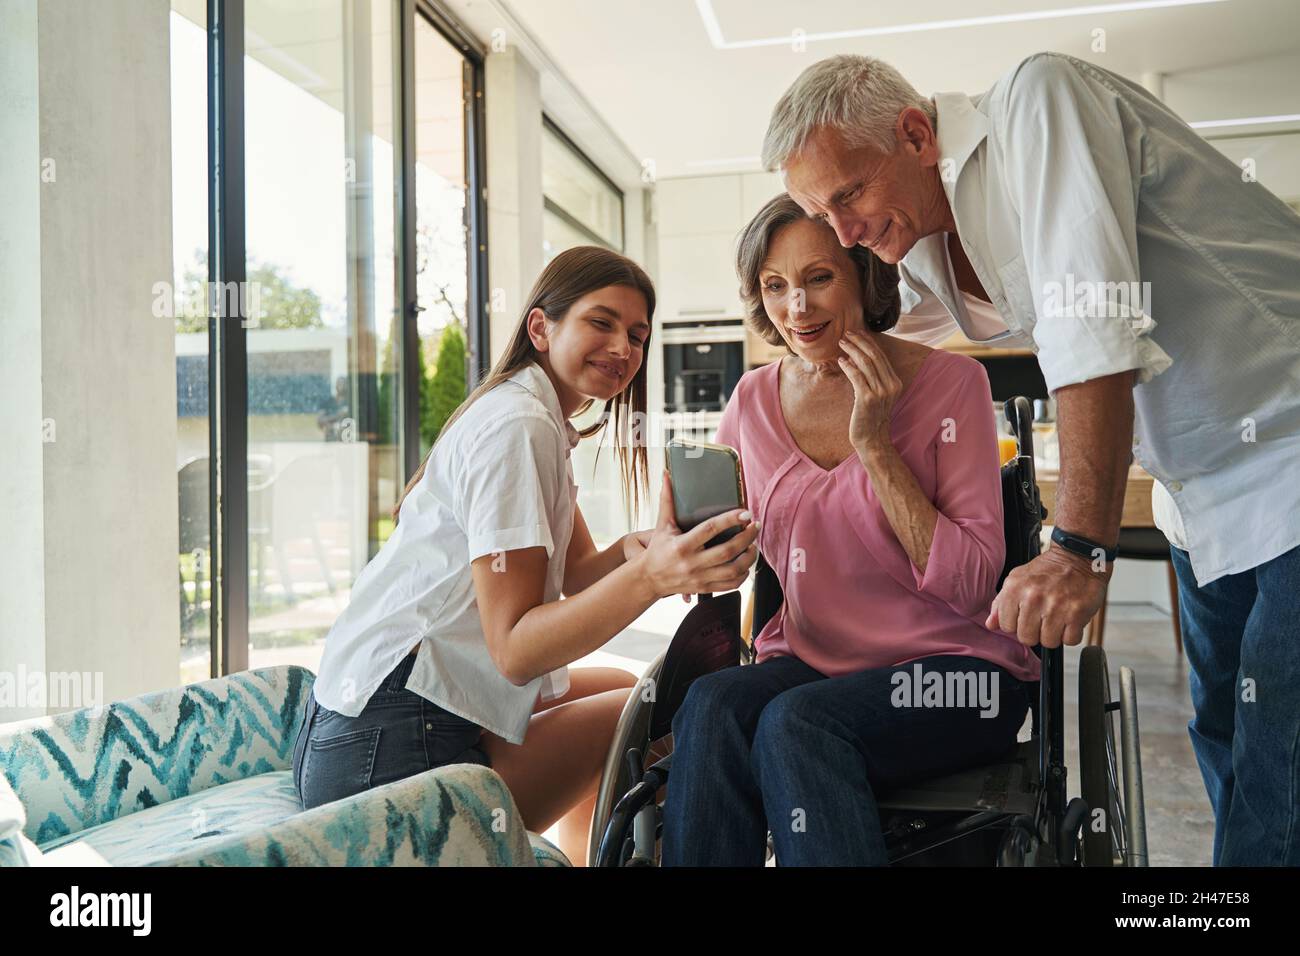 Female with disability looking at mobile with interest Stock Photo